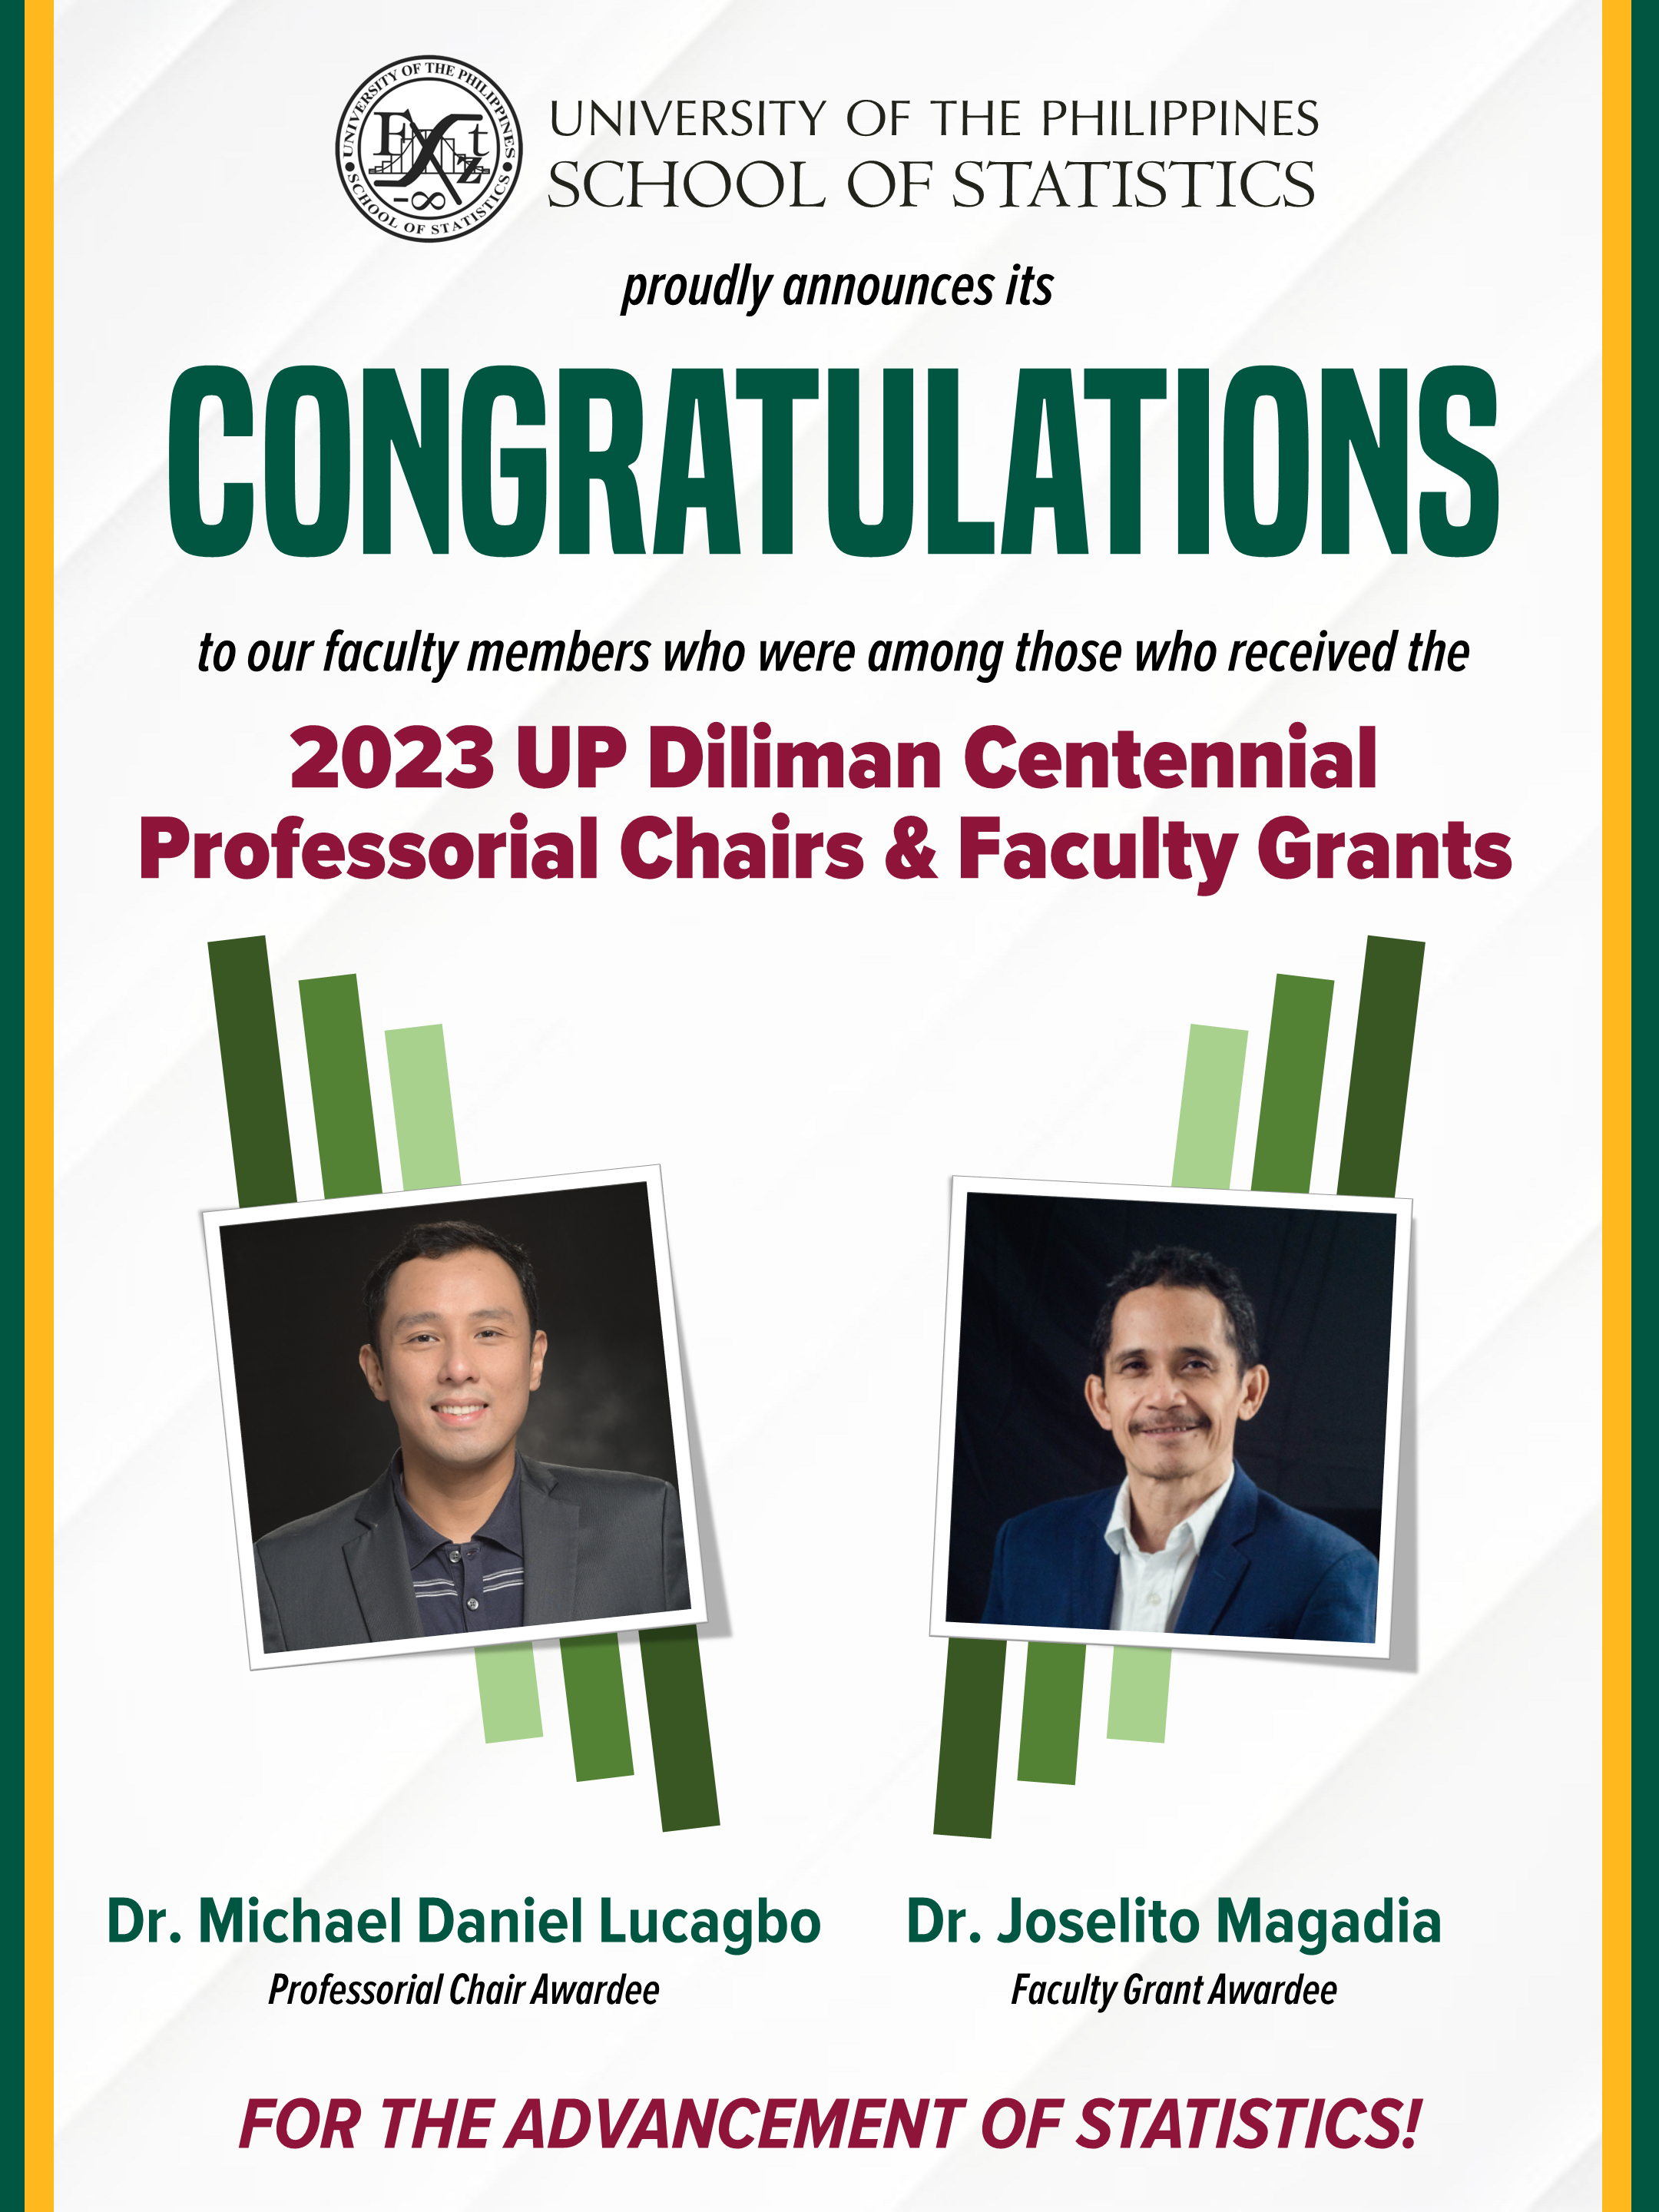 Image for CONGRATULATIONS to the 2023 UP DILIMAN CENTENNIAL PROFESSORIAL CHAIR & FACULTY GRANT AWARDEES